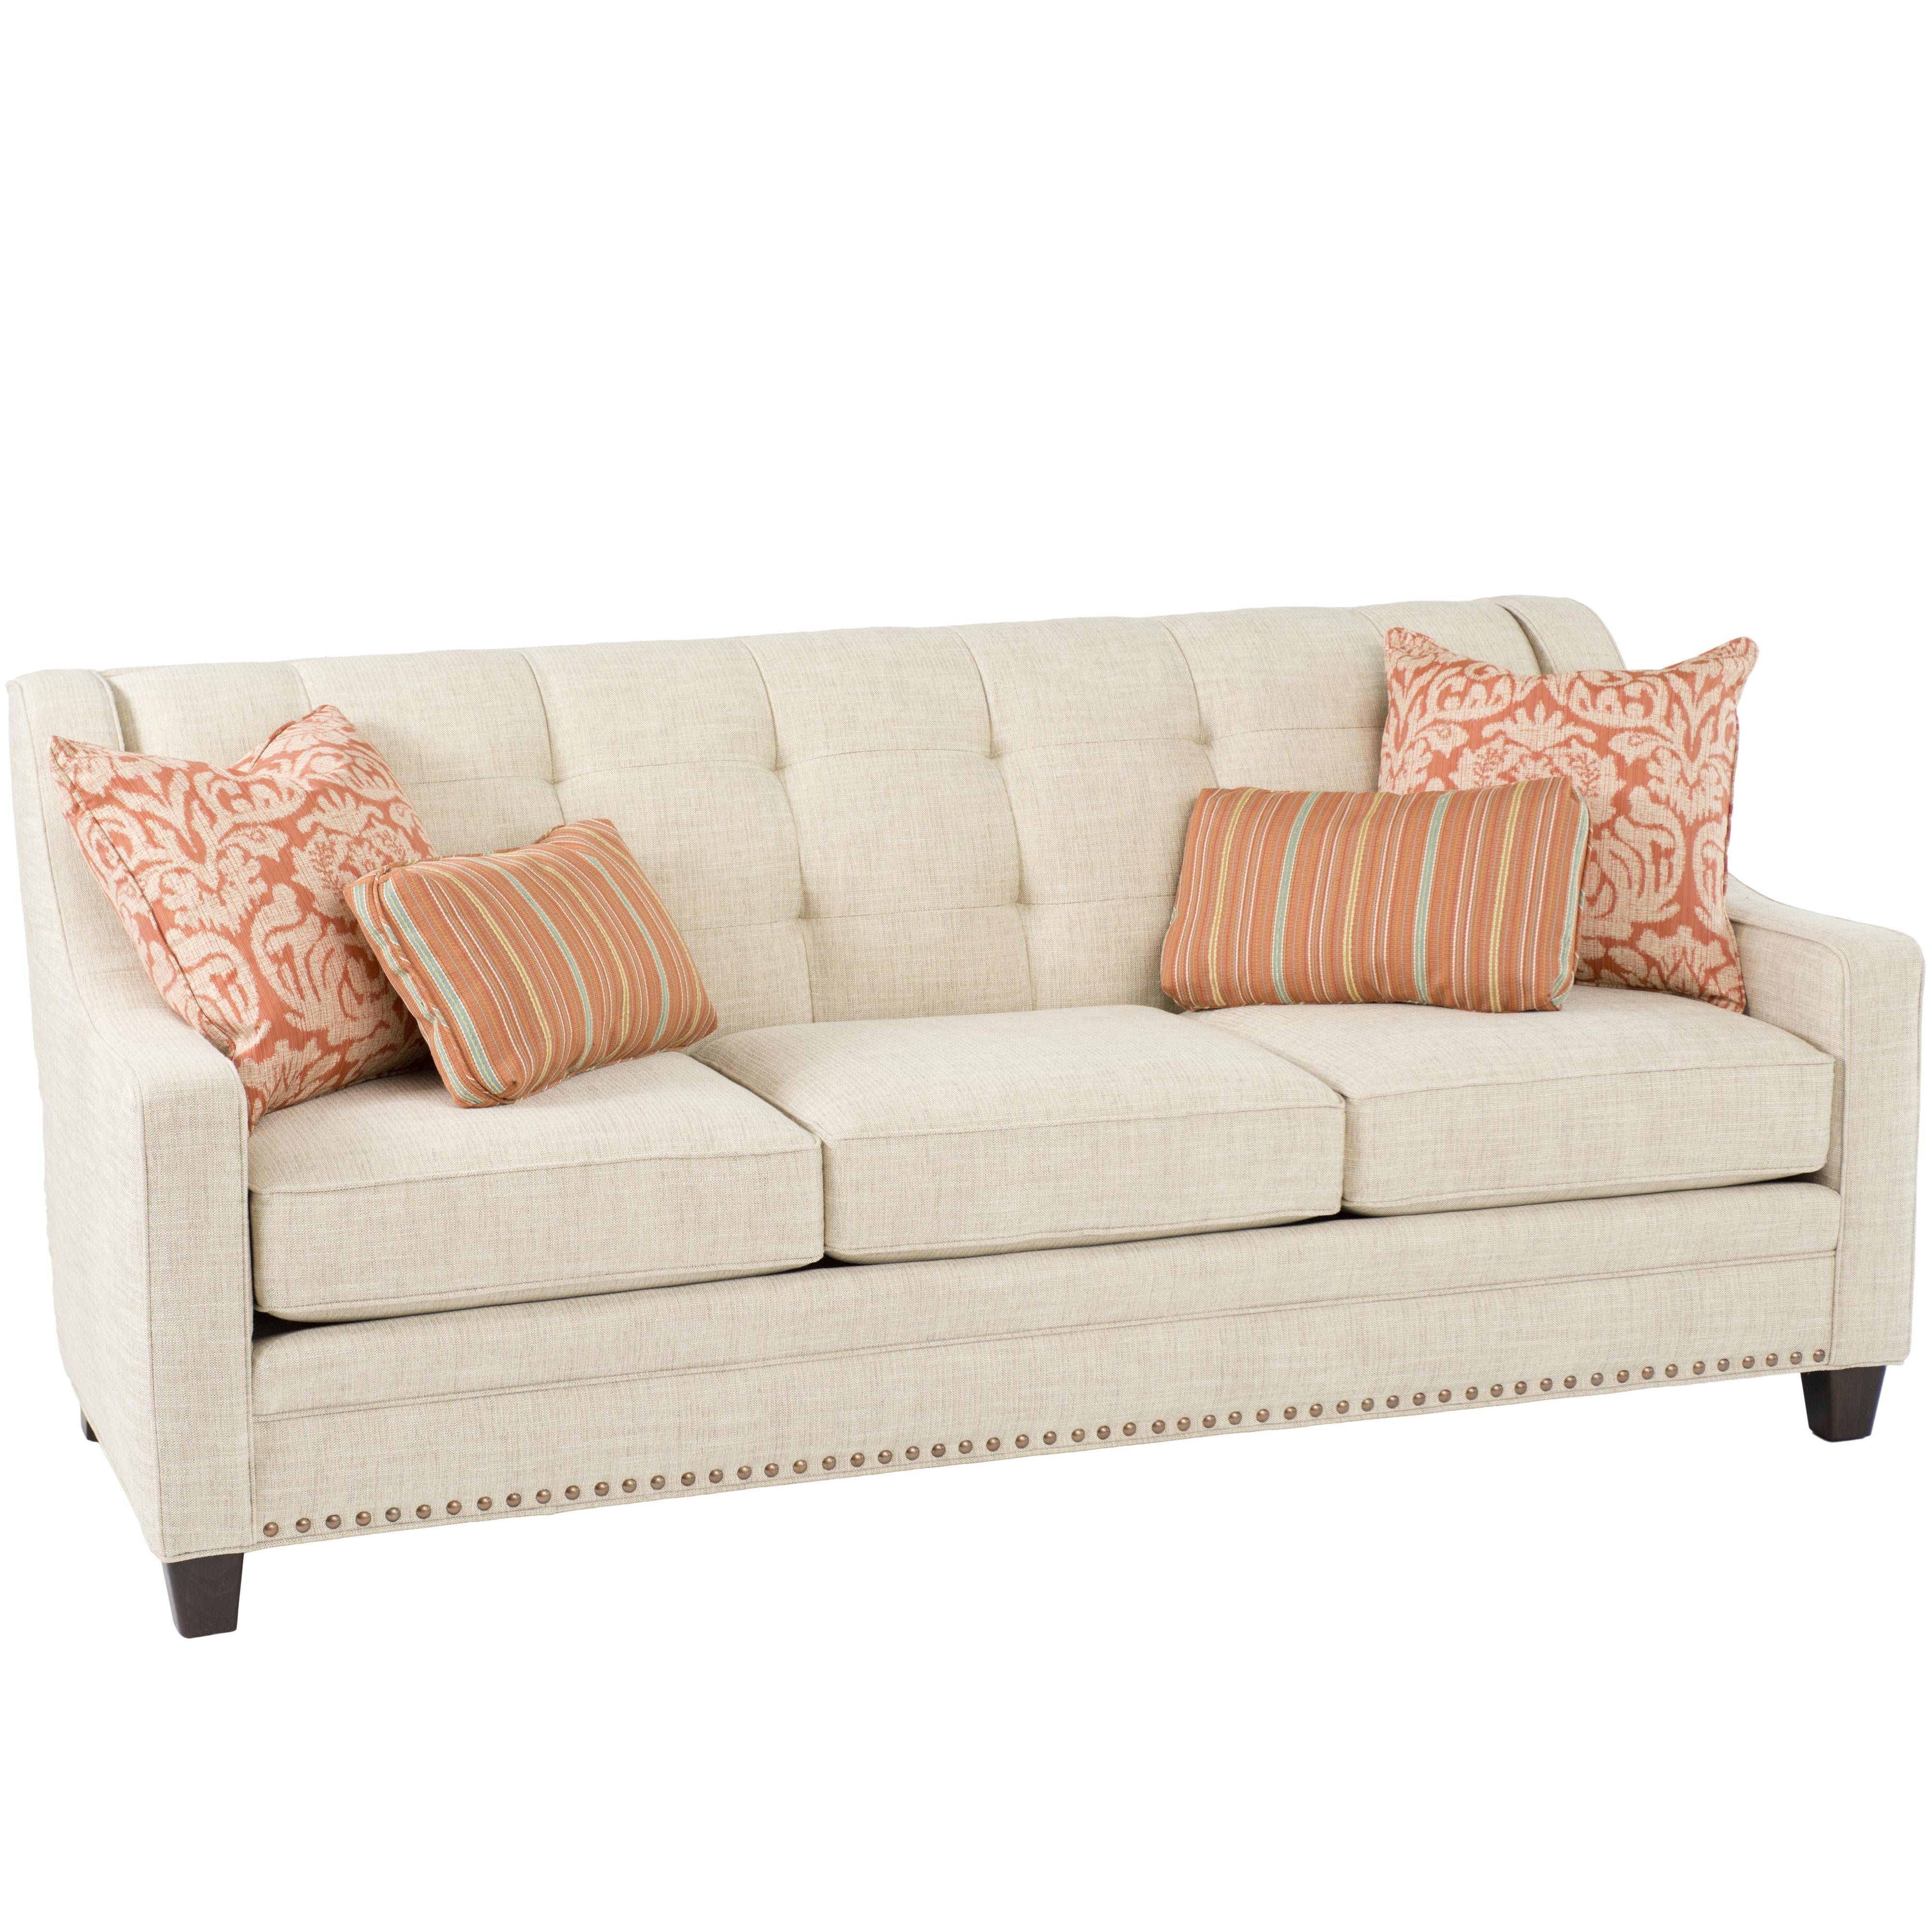 Smith Brothers 203 Priced In Base Grade (not As Shown) – Wayside For Smith Brothers Sofas (View 7 of 15)